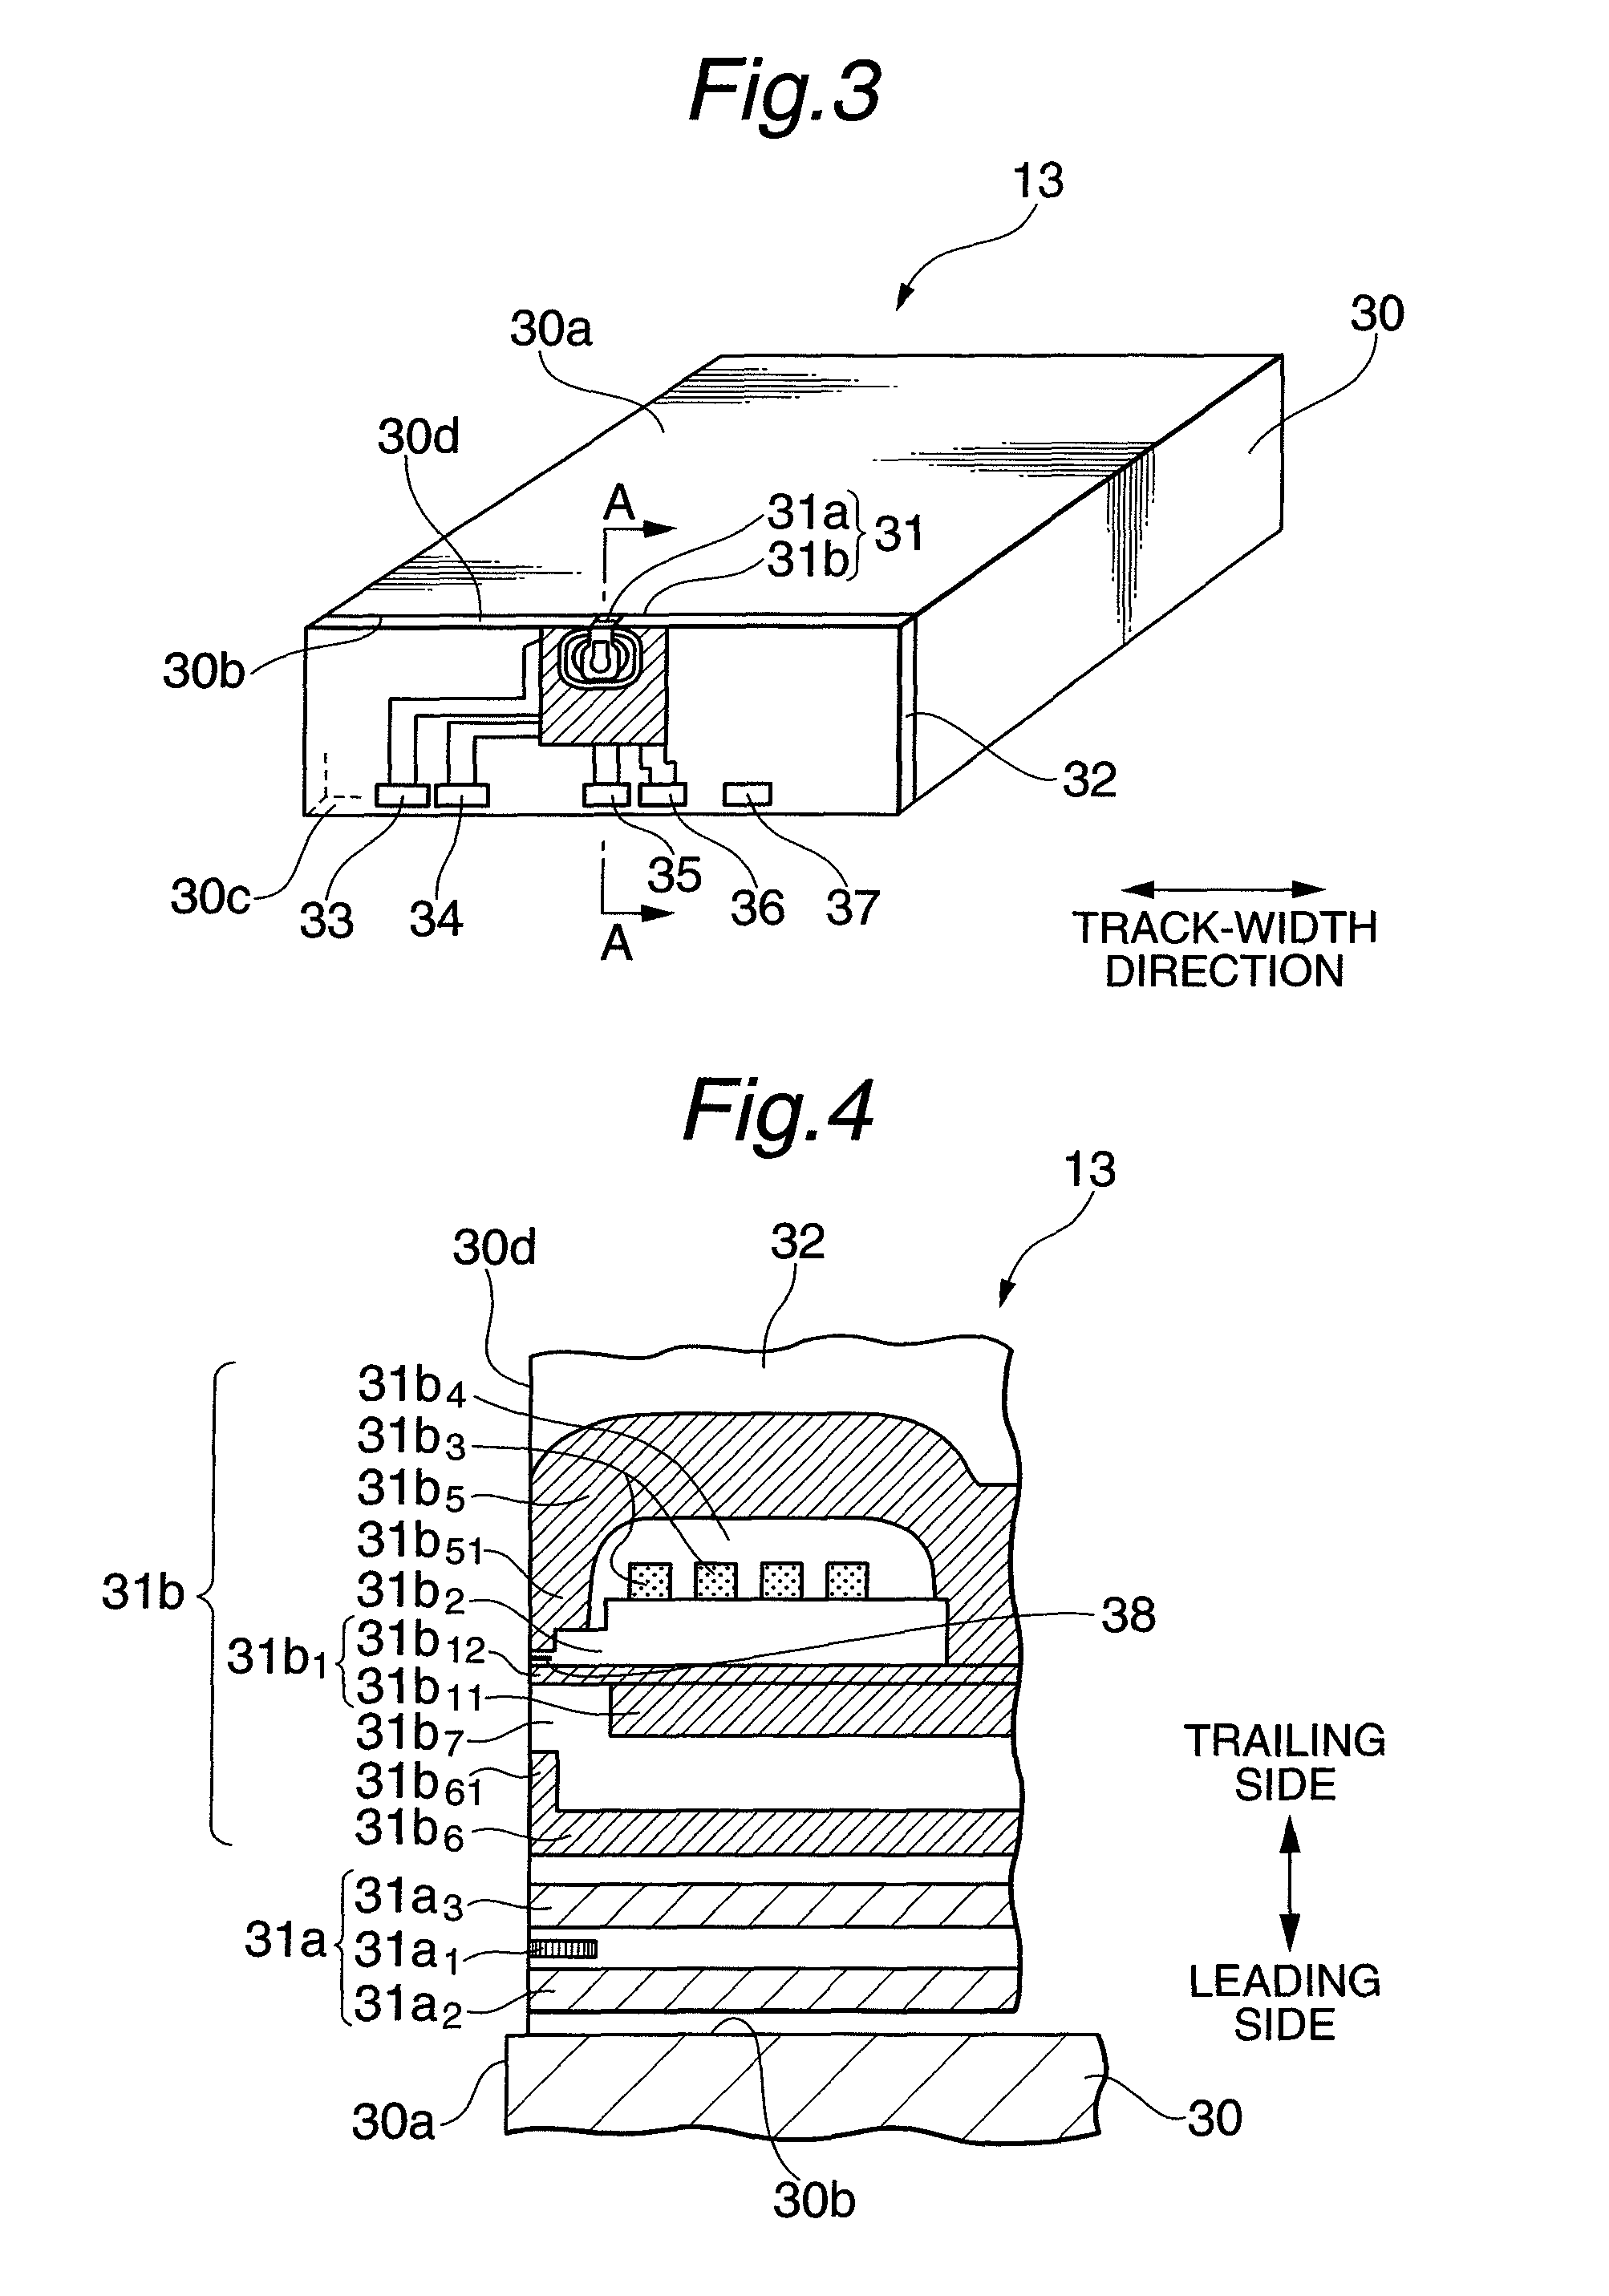 Magnetic recording apparatus provided with microwave-assisted head